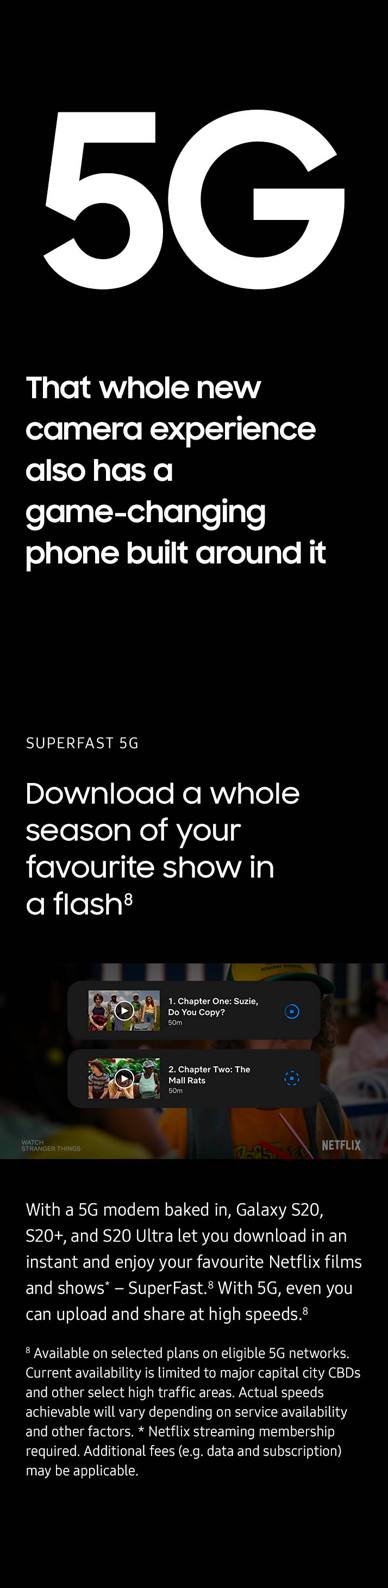 That whole new camera experience also has a game-changing phone built around it. HyperFast 5G. Download a whole season of your favorite show in a flash. With a 5G modem baked in, Galaxy S20, S20+, and S20 Ultra let you download in an instant and enjoy your favorite Netflix films and shows - SuperFast. With 5G, even you can upload and share at high speeds. Available on selected plans on eligible 5G networks. Current availability is limited to major capital city CBDs and other select high traffic areas. Actual speeds achievable will vary depending on service availability and other factors.